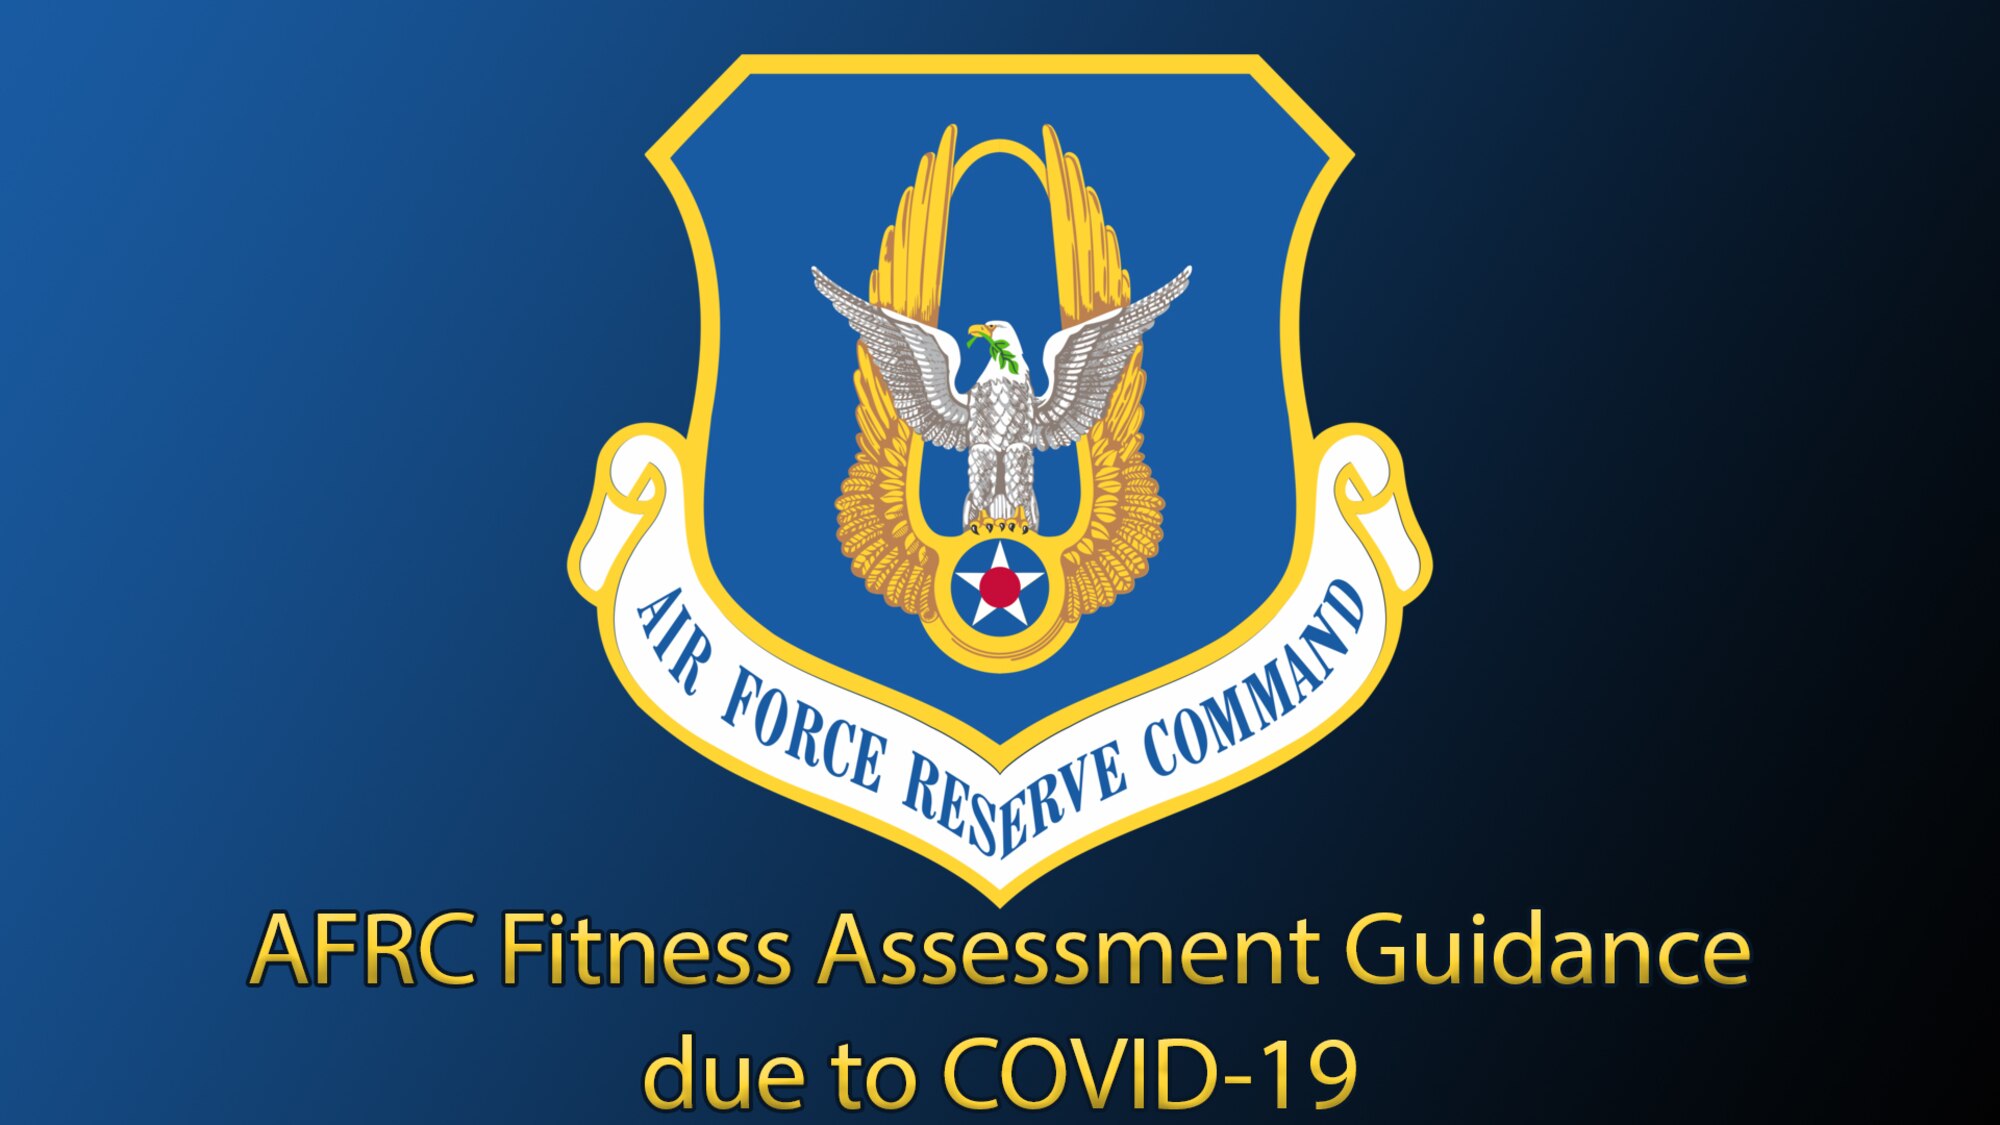 Graphic with AFRC shield and text which reads AFRC Fitness Assessment Guidance due to COVID-19